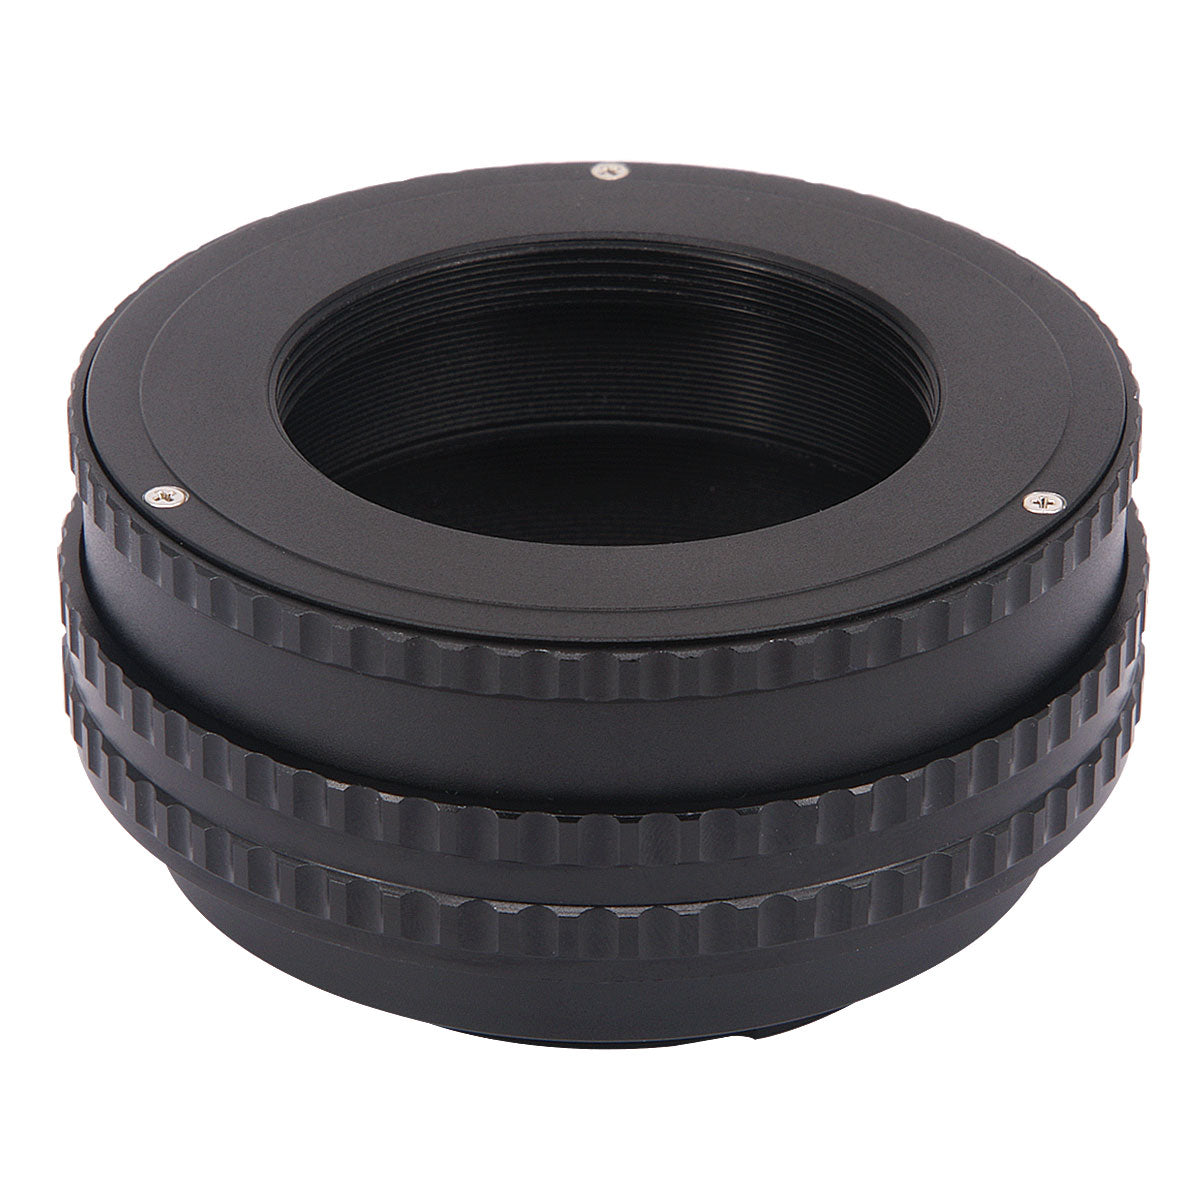 Haoge Macro Focus Lens Mount Adapter Built-in Focusing Helicoid for M42 42mm Screw mount Lens to Sony E-mount NEX Camera 17mm-31mm